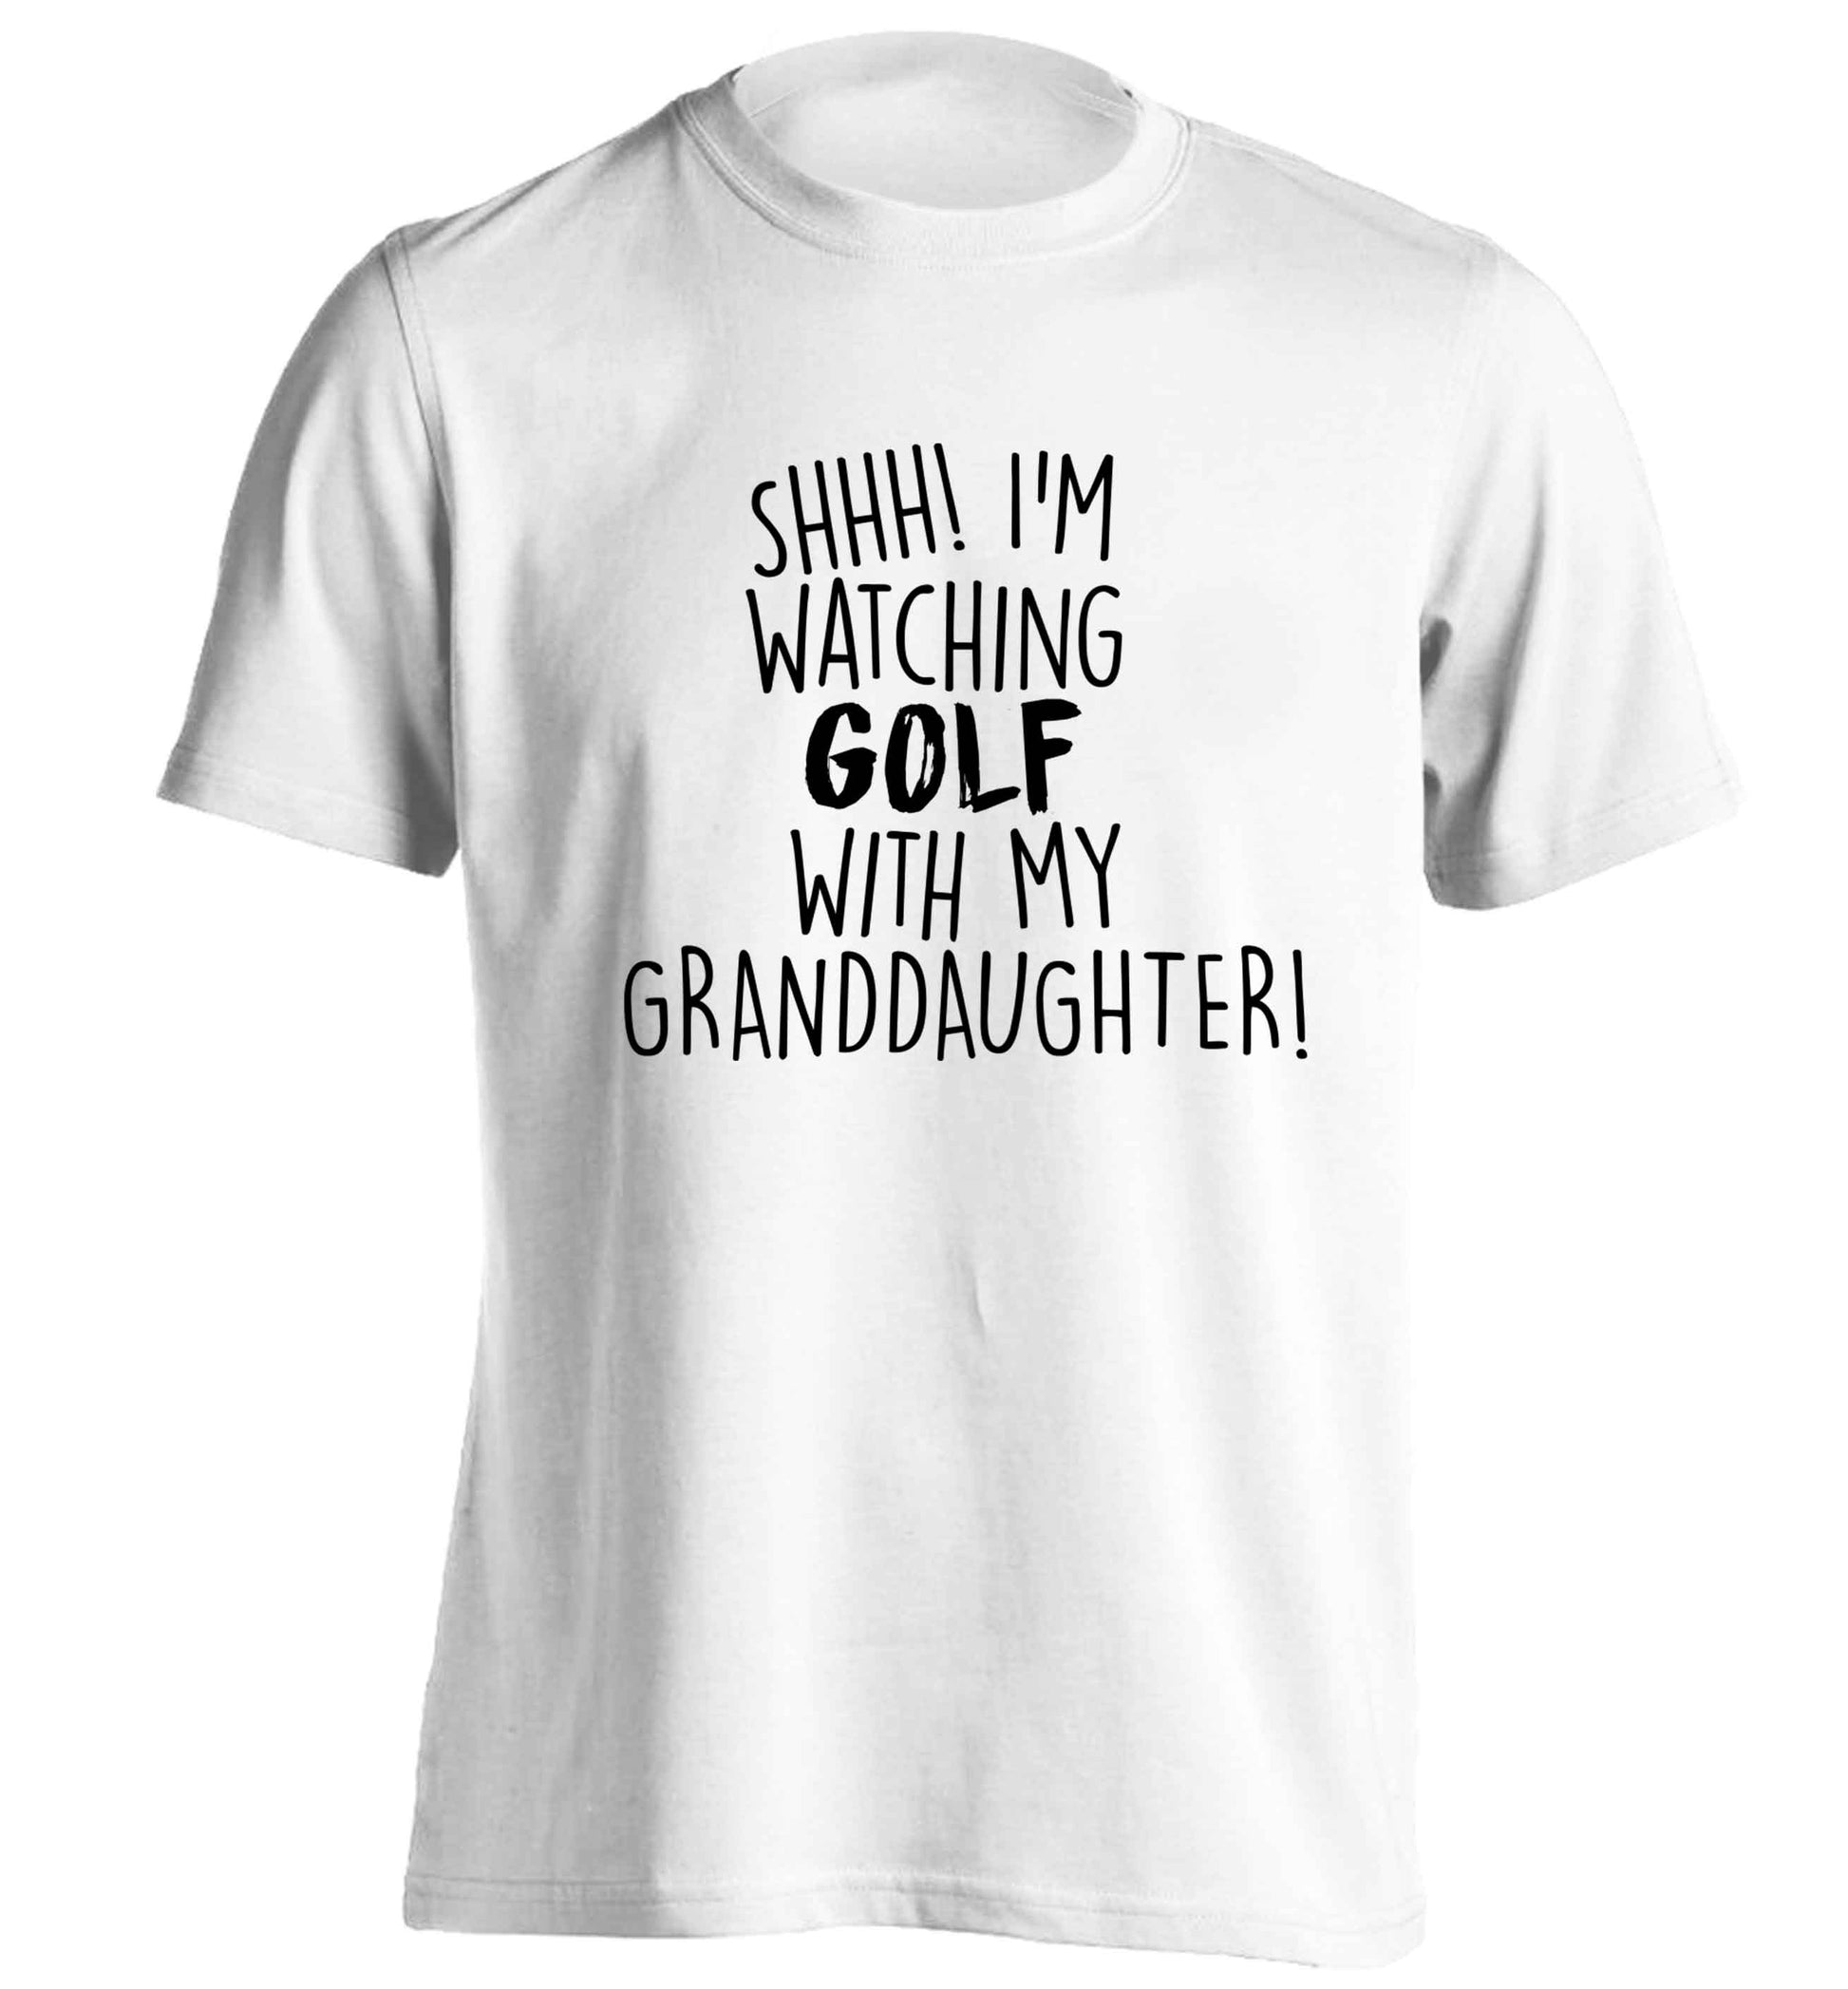 Shh I'm watching golf with my granddaughter adults unisex white Tshirt 2XL